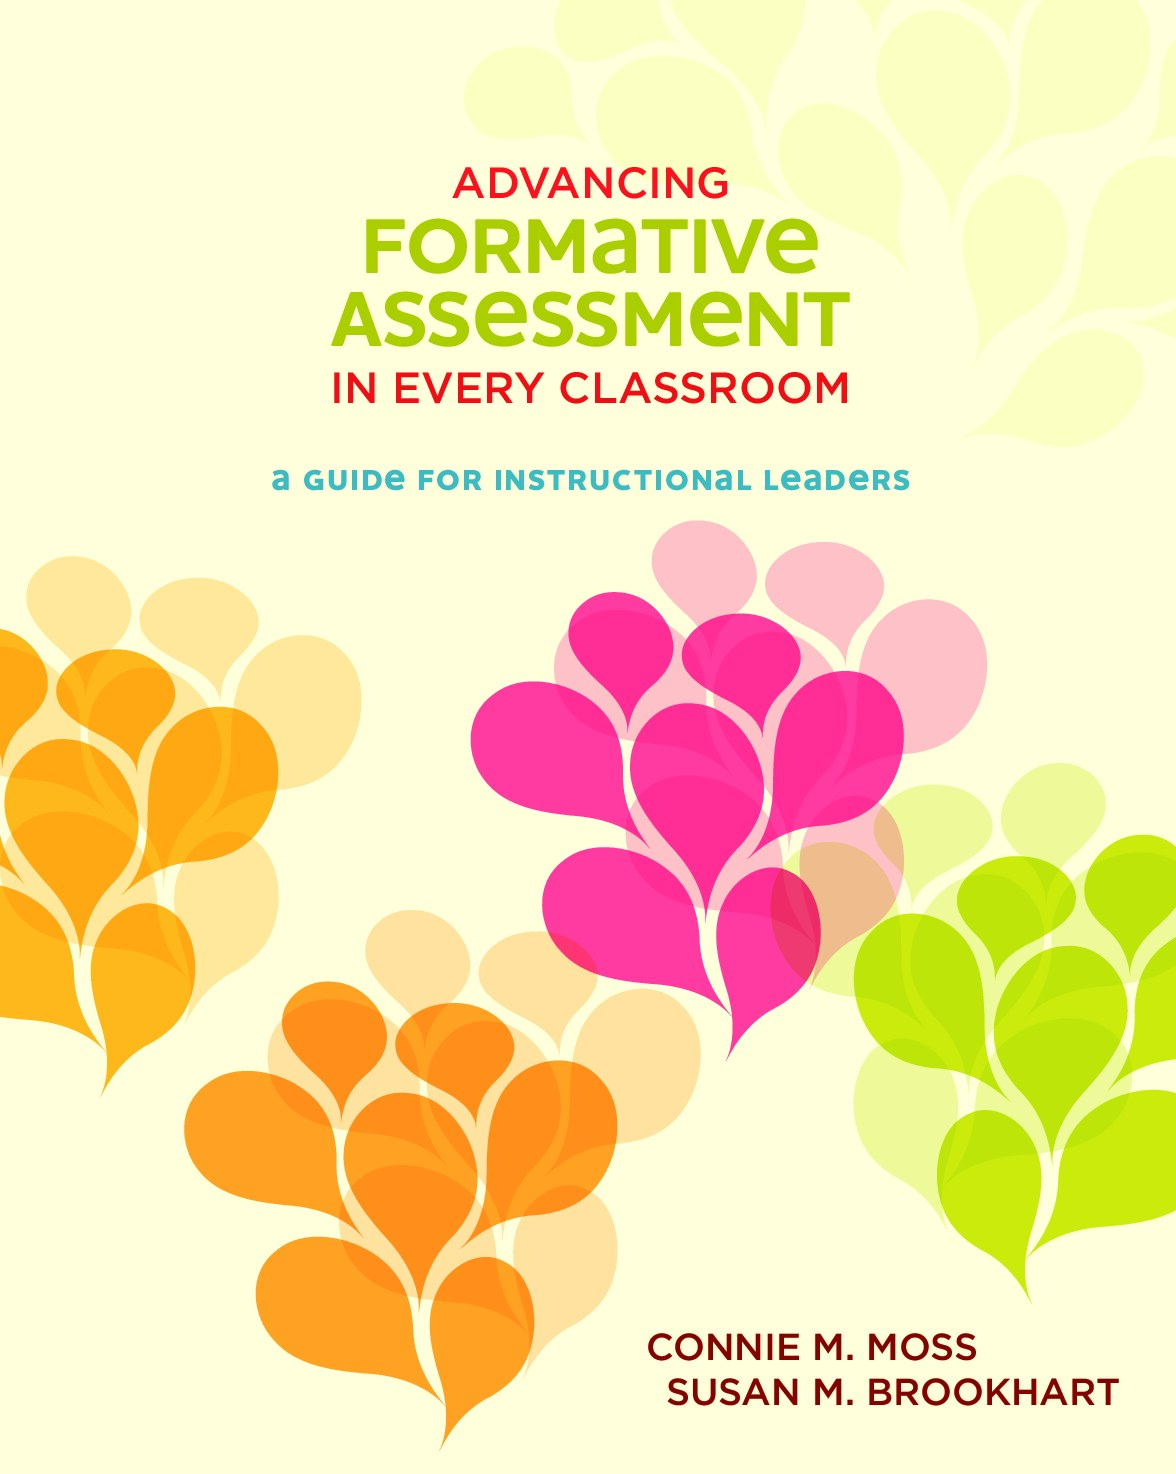 Advancing Formative Assessment in Every Classroom A Guide for Instructional Leaders by Connie M. Moss, Susan M. Brookhart (z-lib.org)